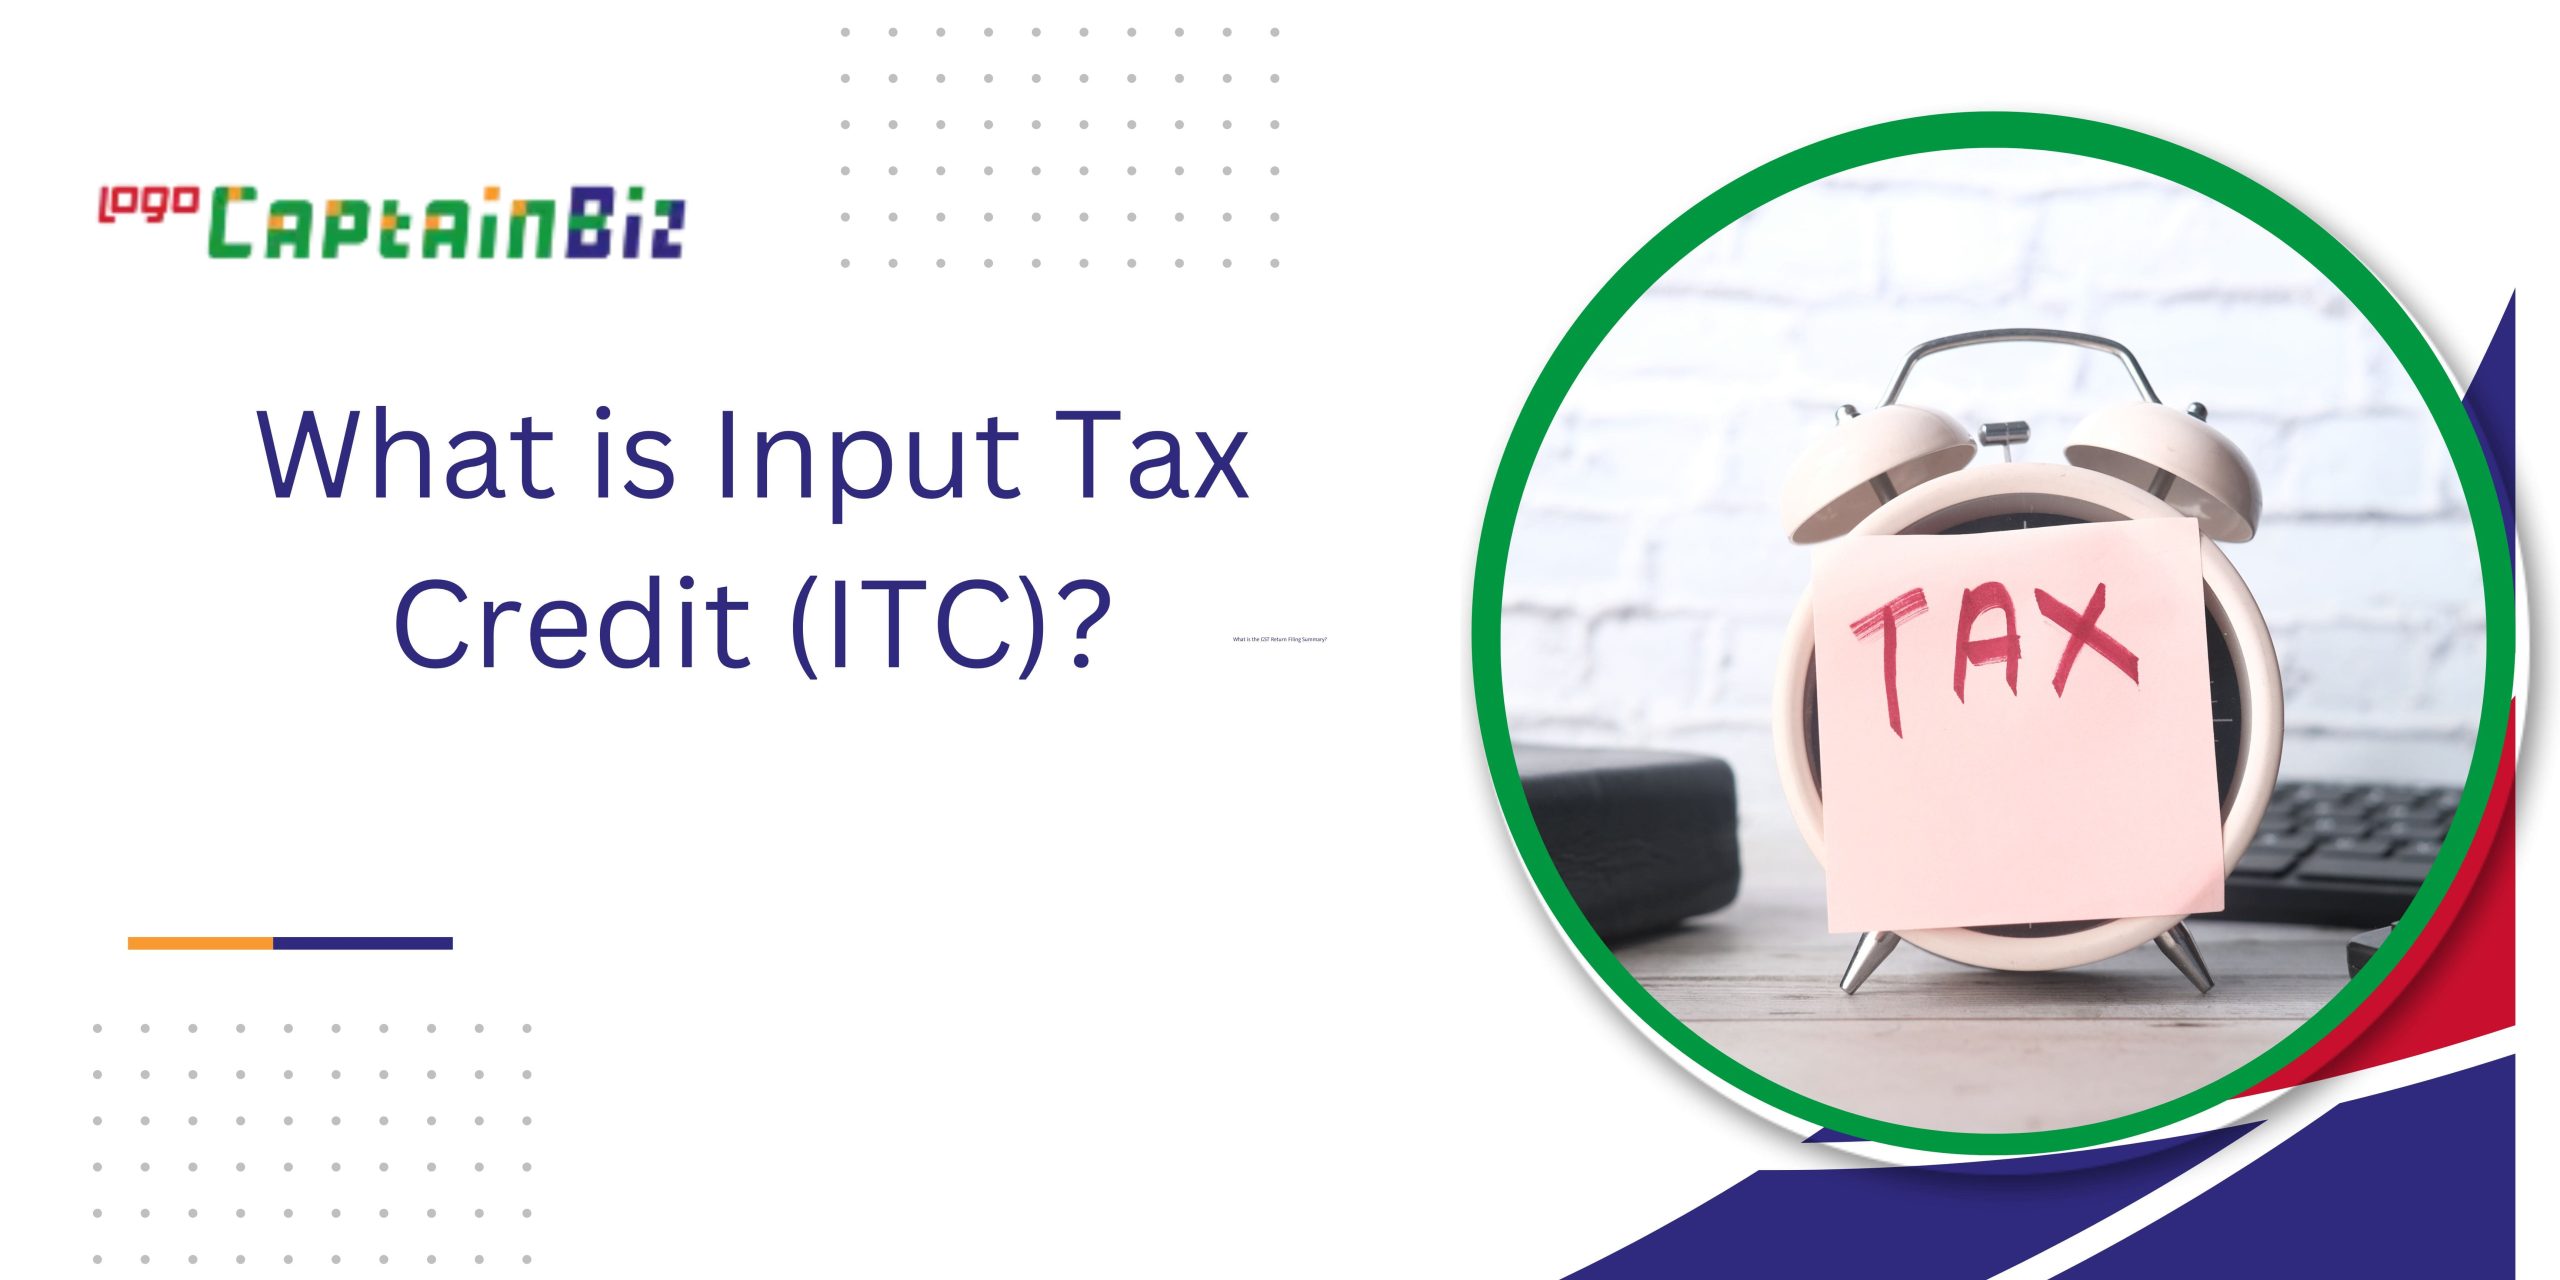 What is Input Tax Credit (ITC)?